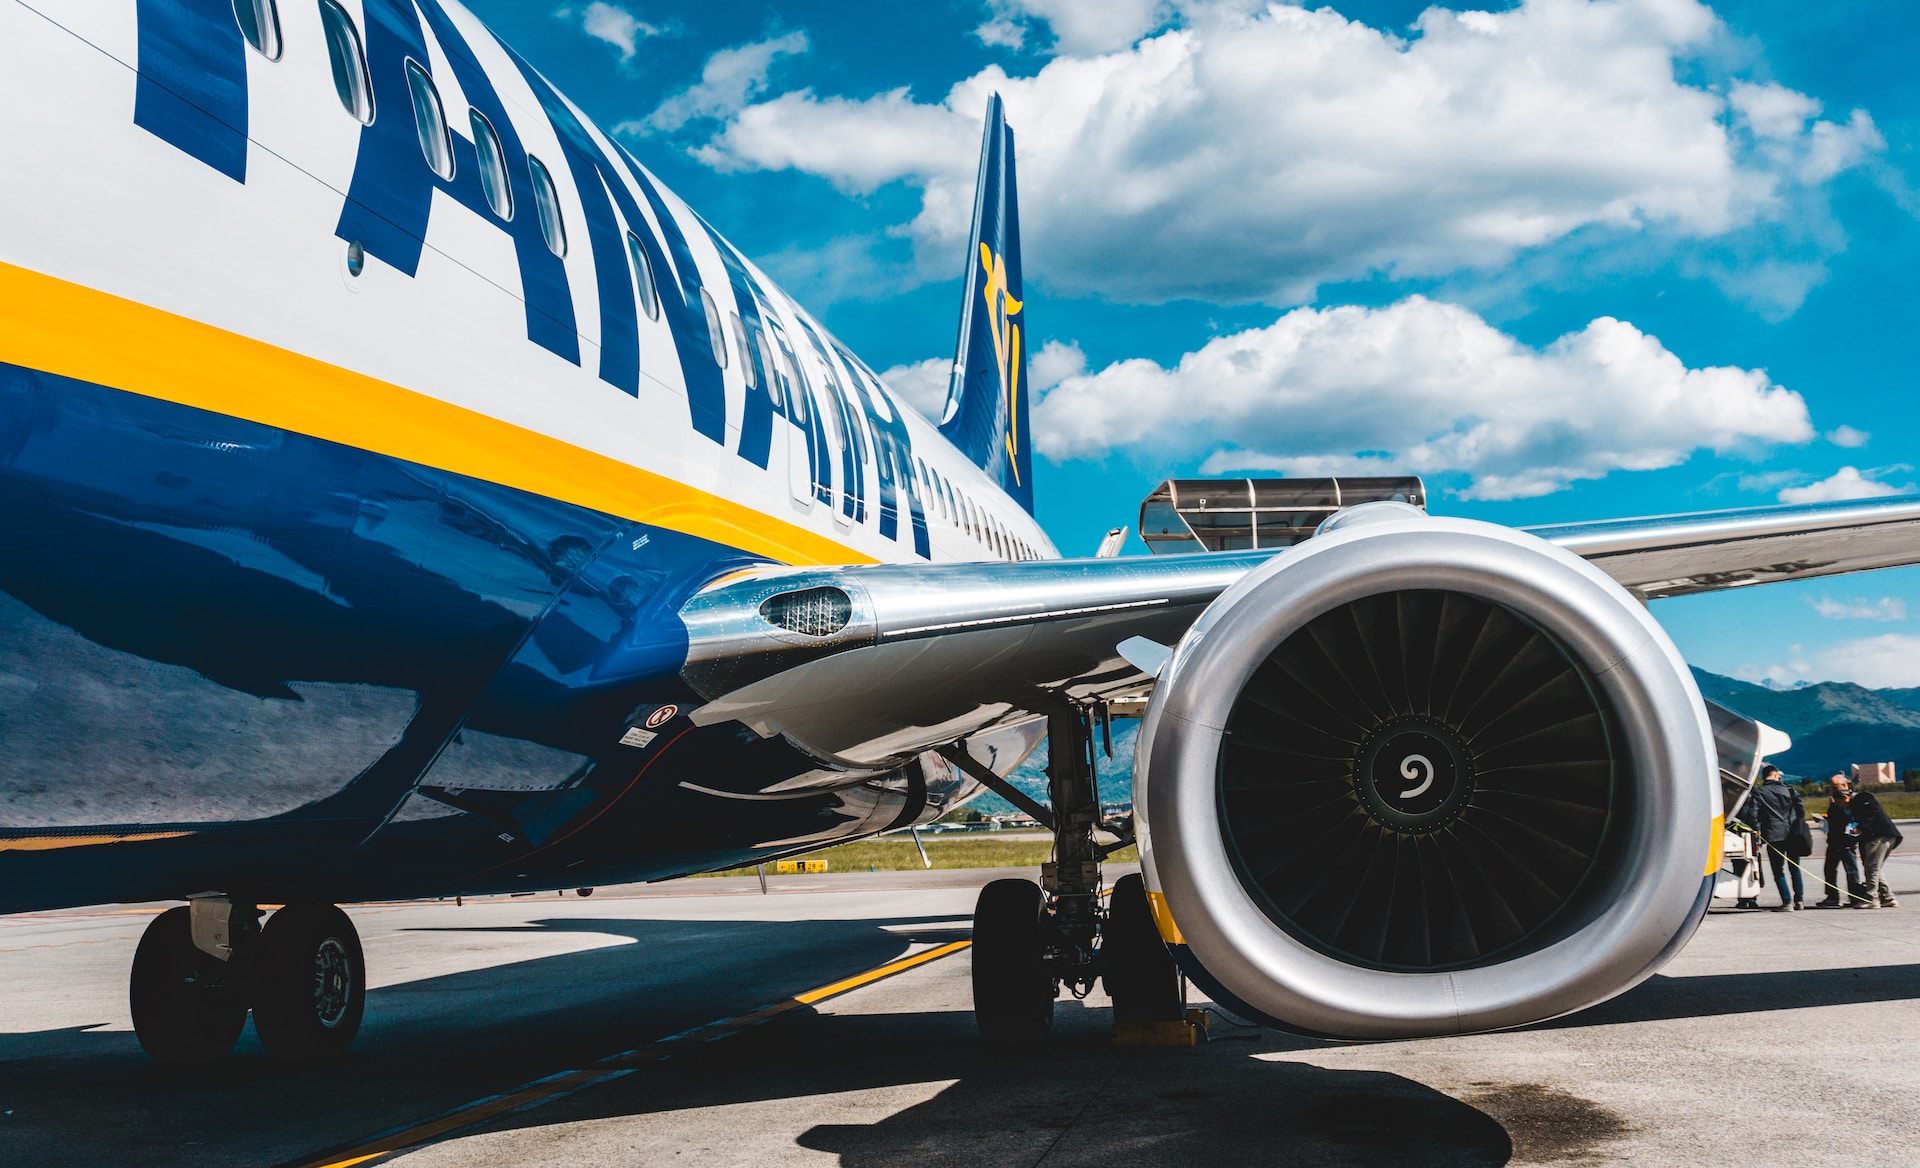 lucas davies jpHDJGqLJrY unsplash Cancel the Chaos: How to Secure Your Compensation with Ryanair